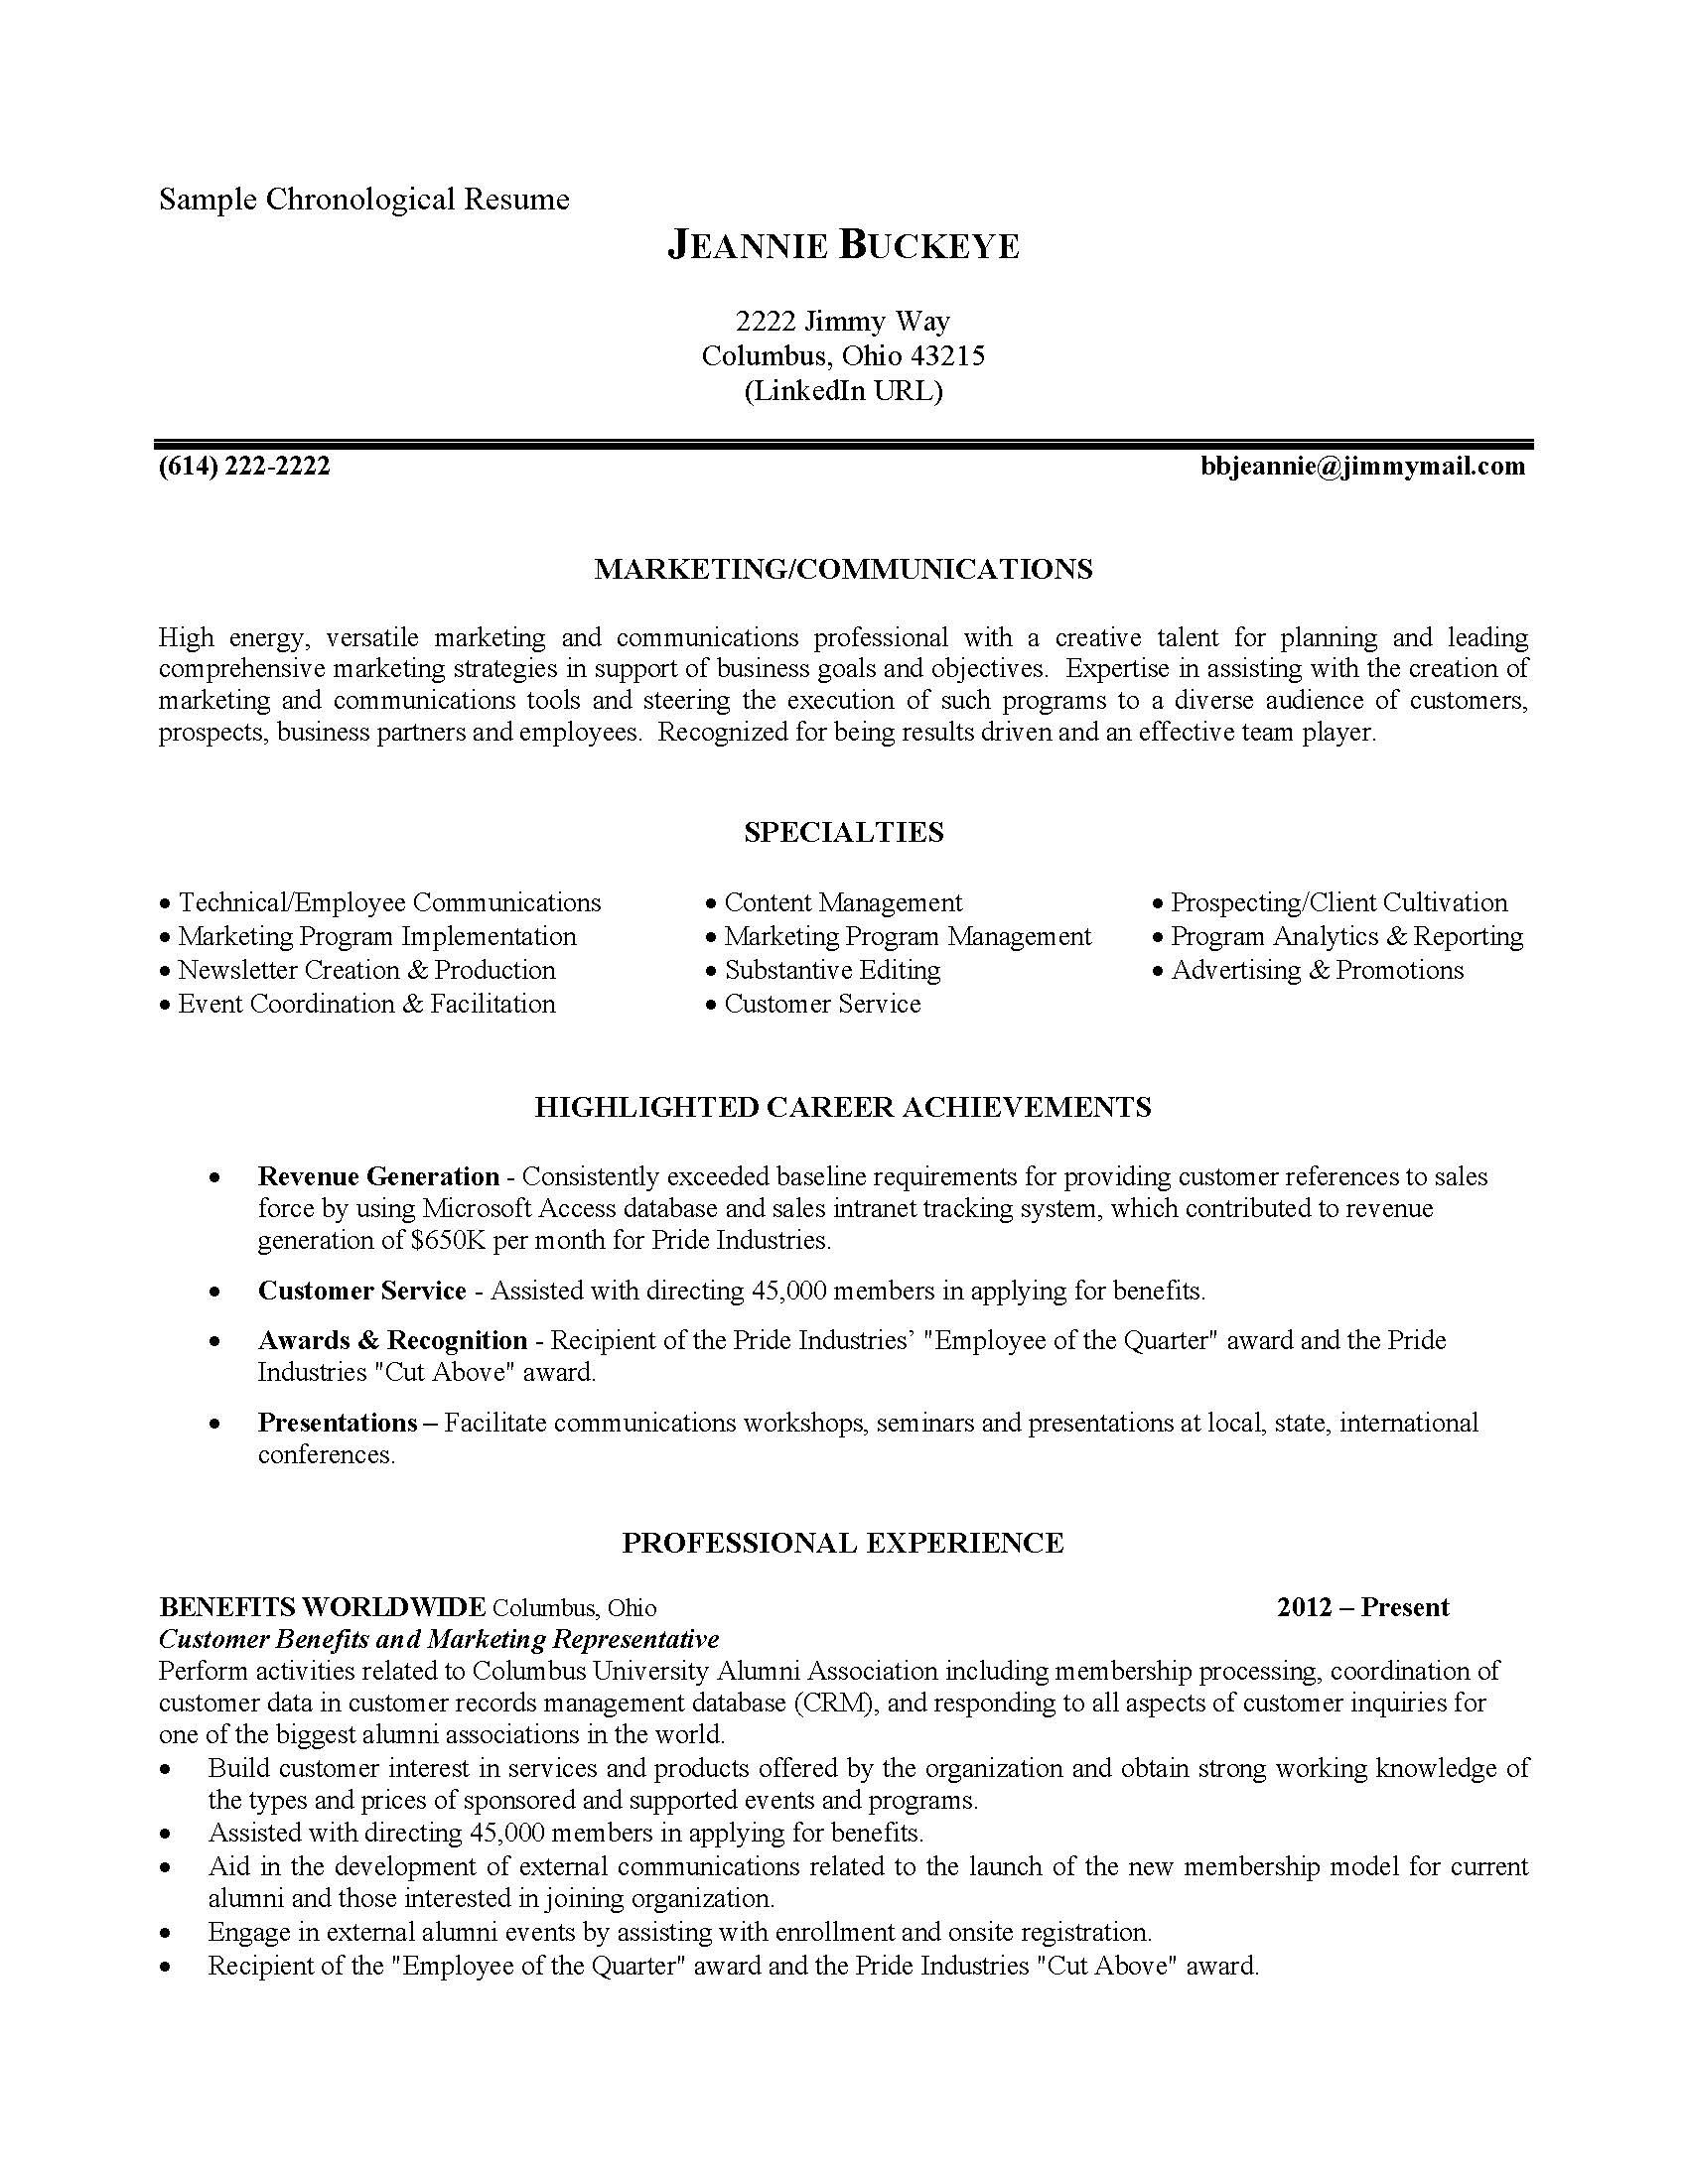 Fisher College Of Business Resume Template Resumes and Cover Letters Ohio State Alumni association